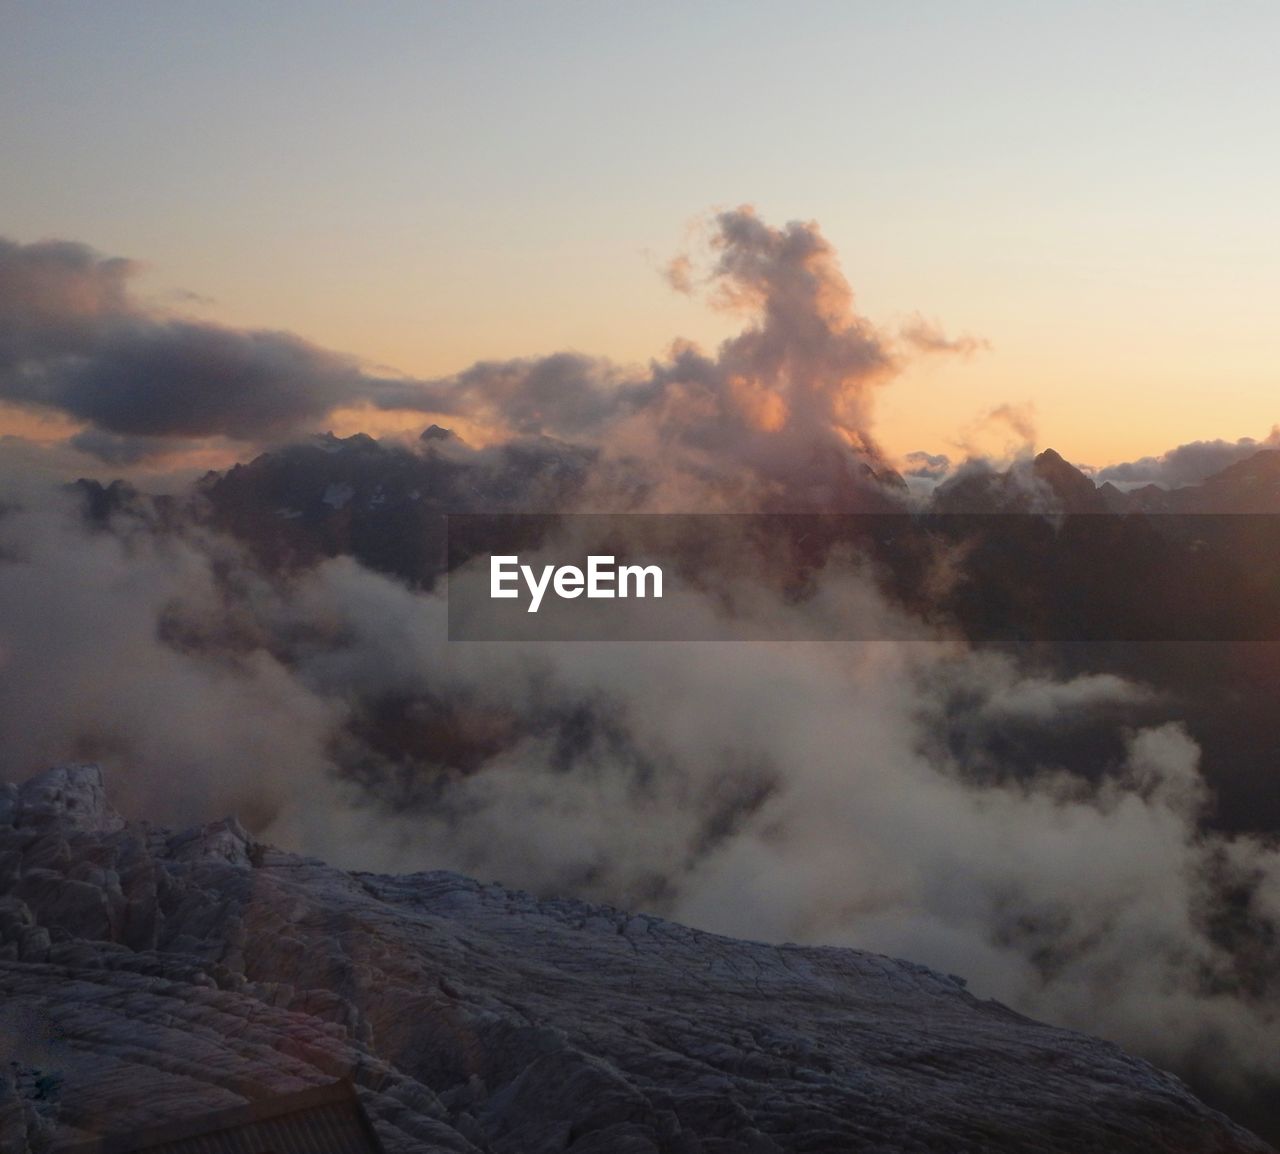 SMOKE EMITTING FROM VOLCANIC MOUNTAINS AGAINST SKY DURING SUNSET